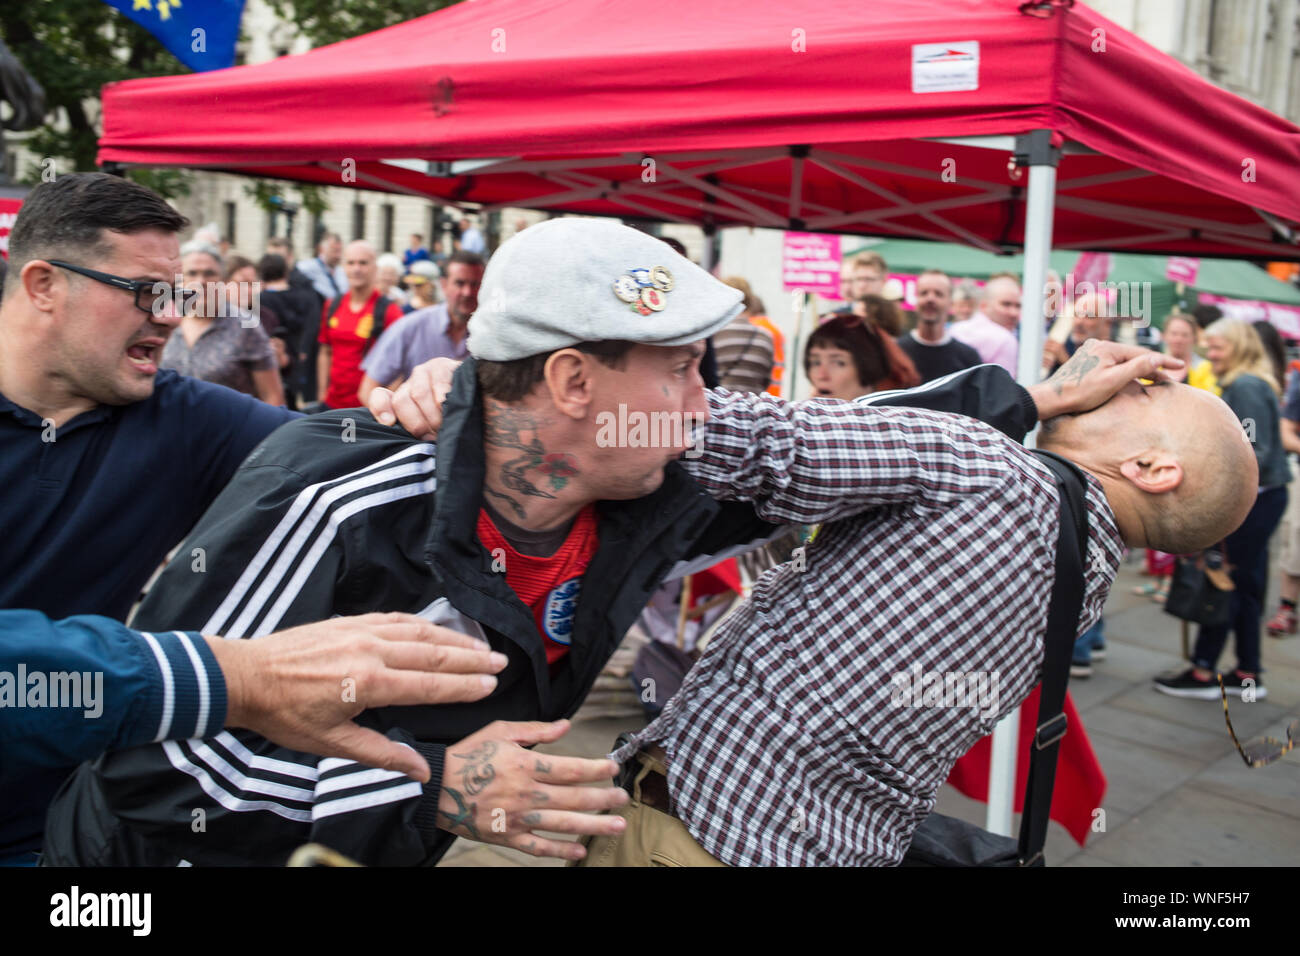 London UK 3rd Sep 2019 Pro and anti Brexit clash as MPs return to Parliament after summer recess in London. A man is attacked by a far right protester as violent clashes take place at End racist Environment rally in Parliament square. Stock Photo